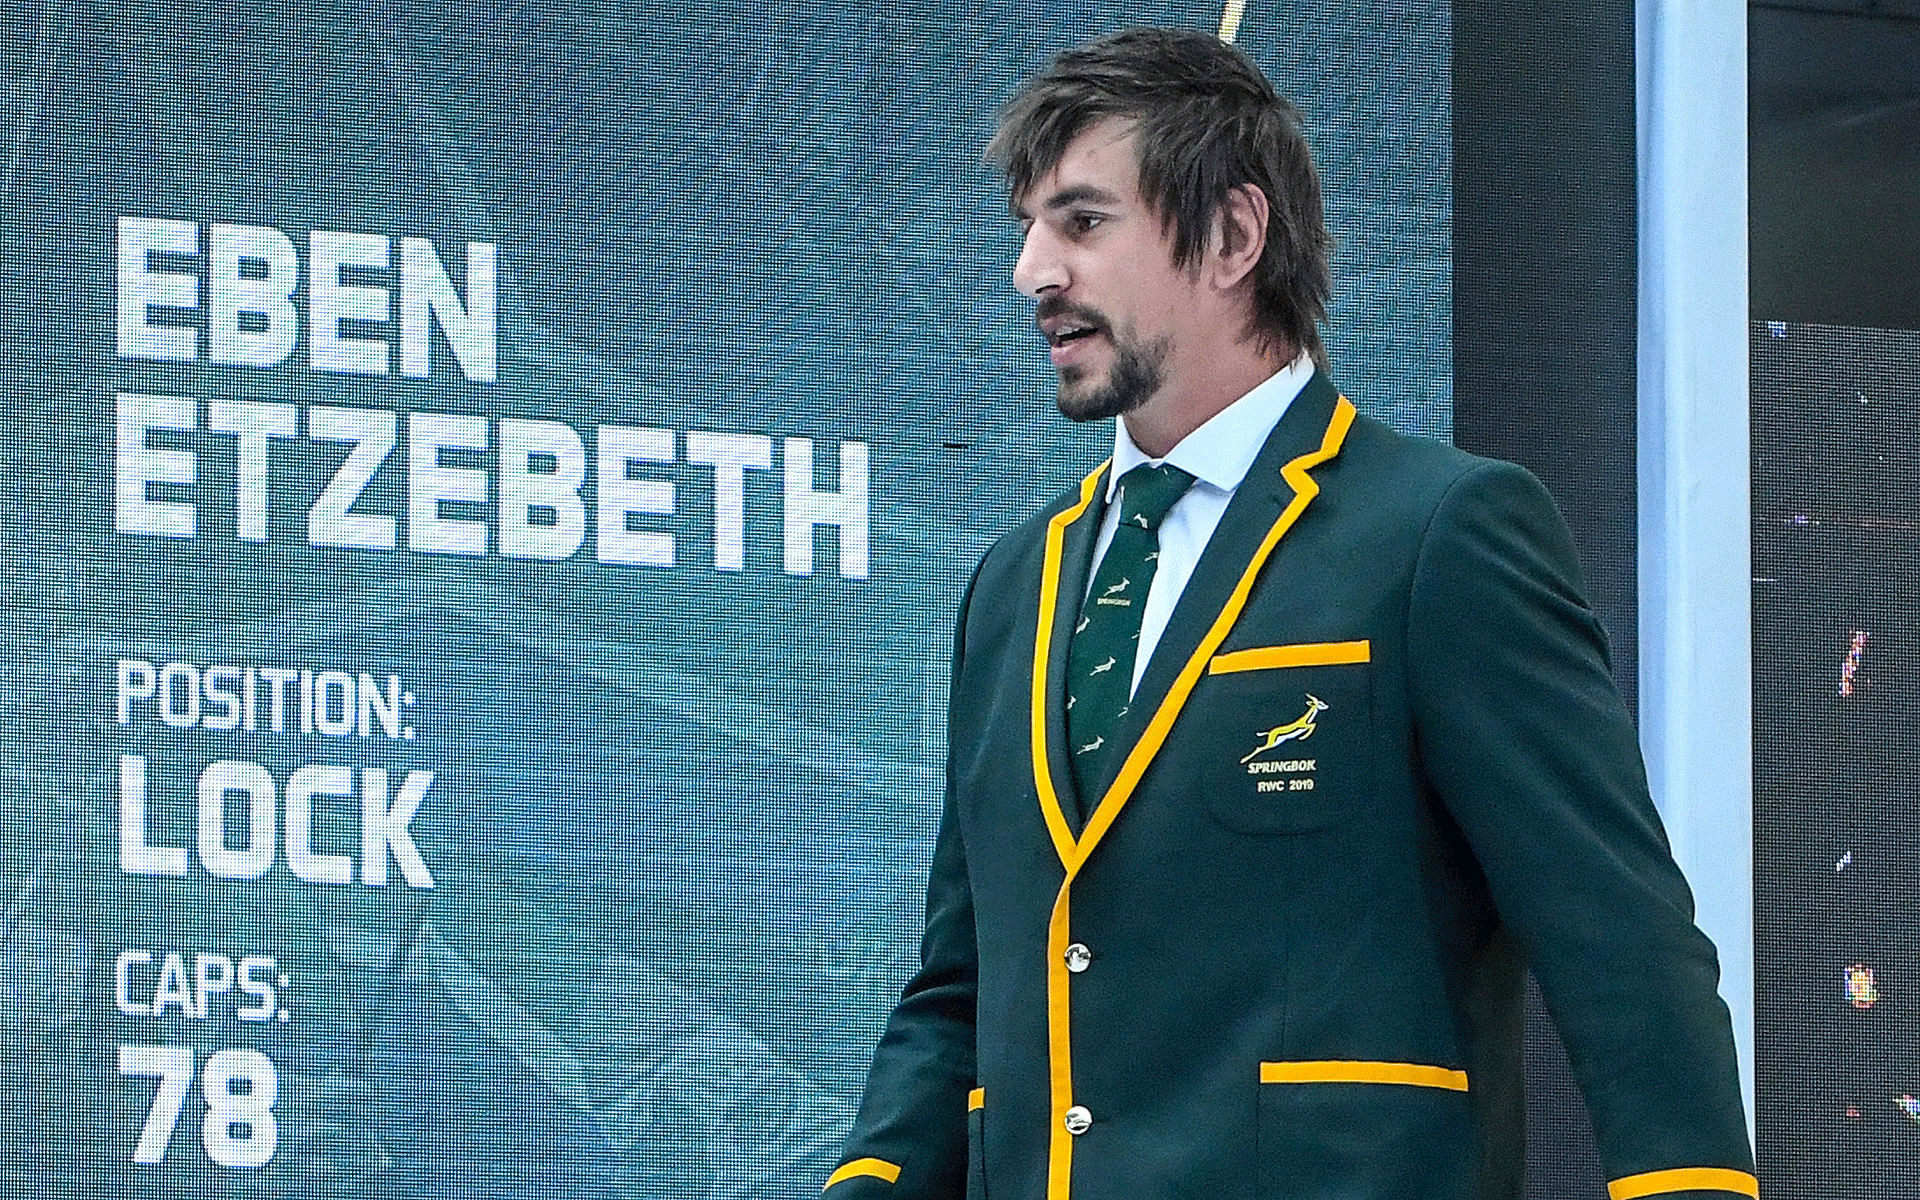 Why Etzebeth switched from wing to lock